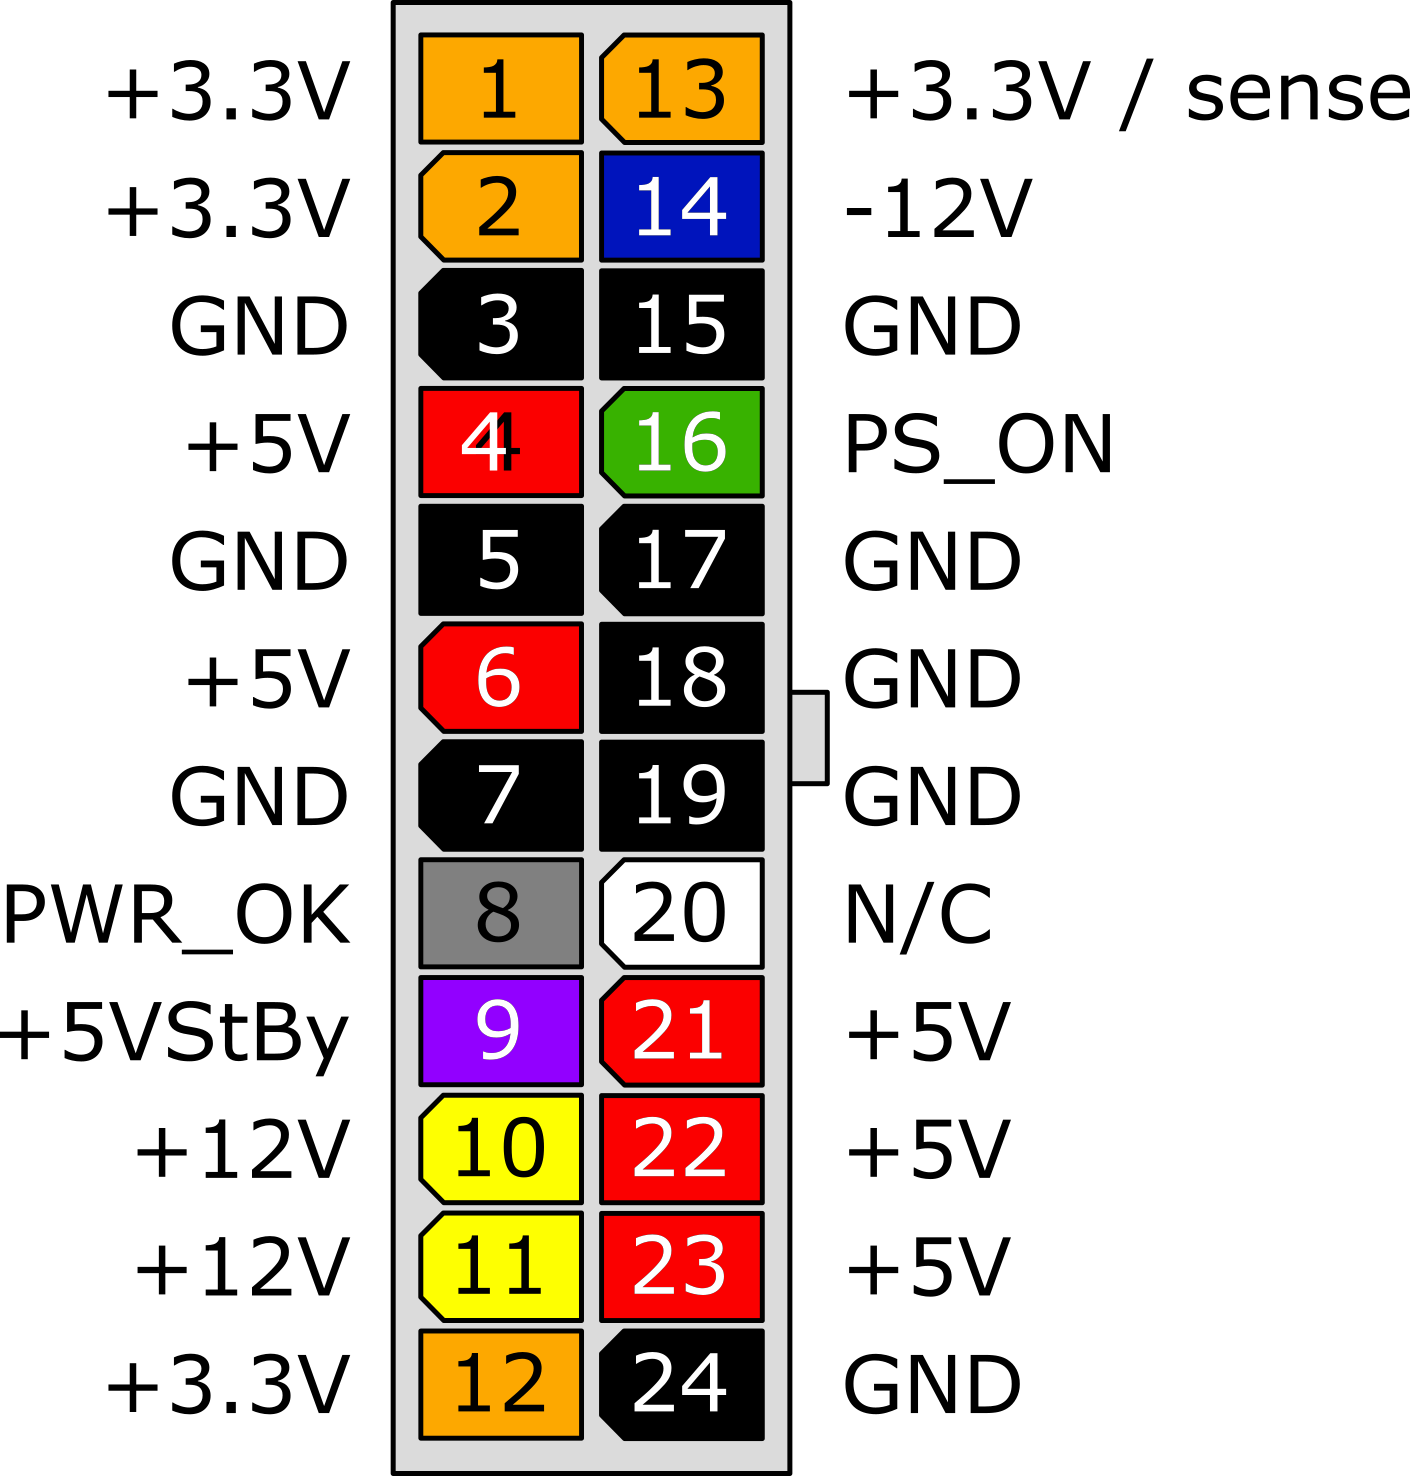 Pinout diagram for 24-pin power cable